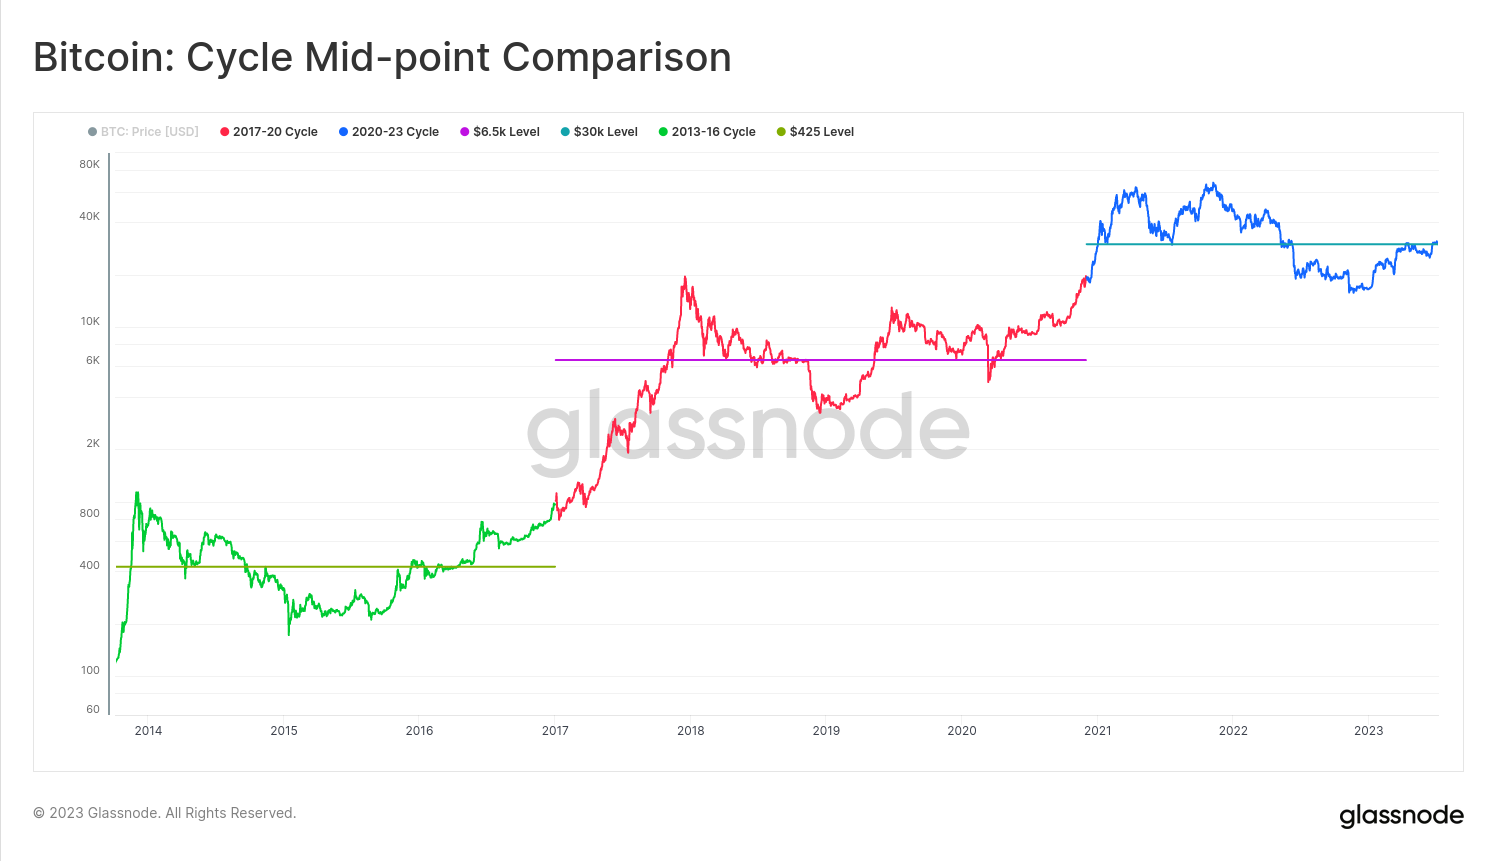 Bitcoin mid-cycle points